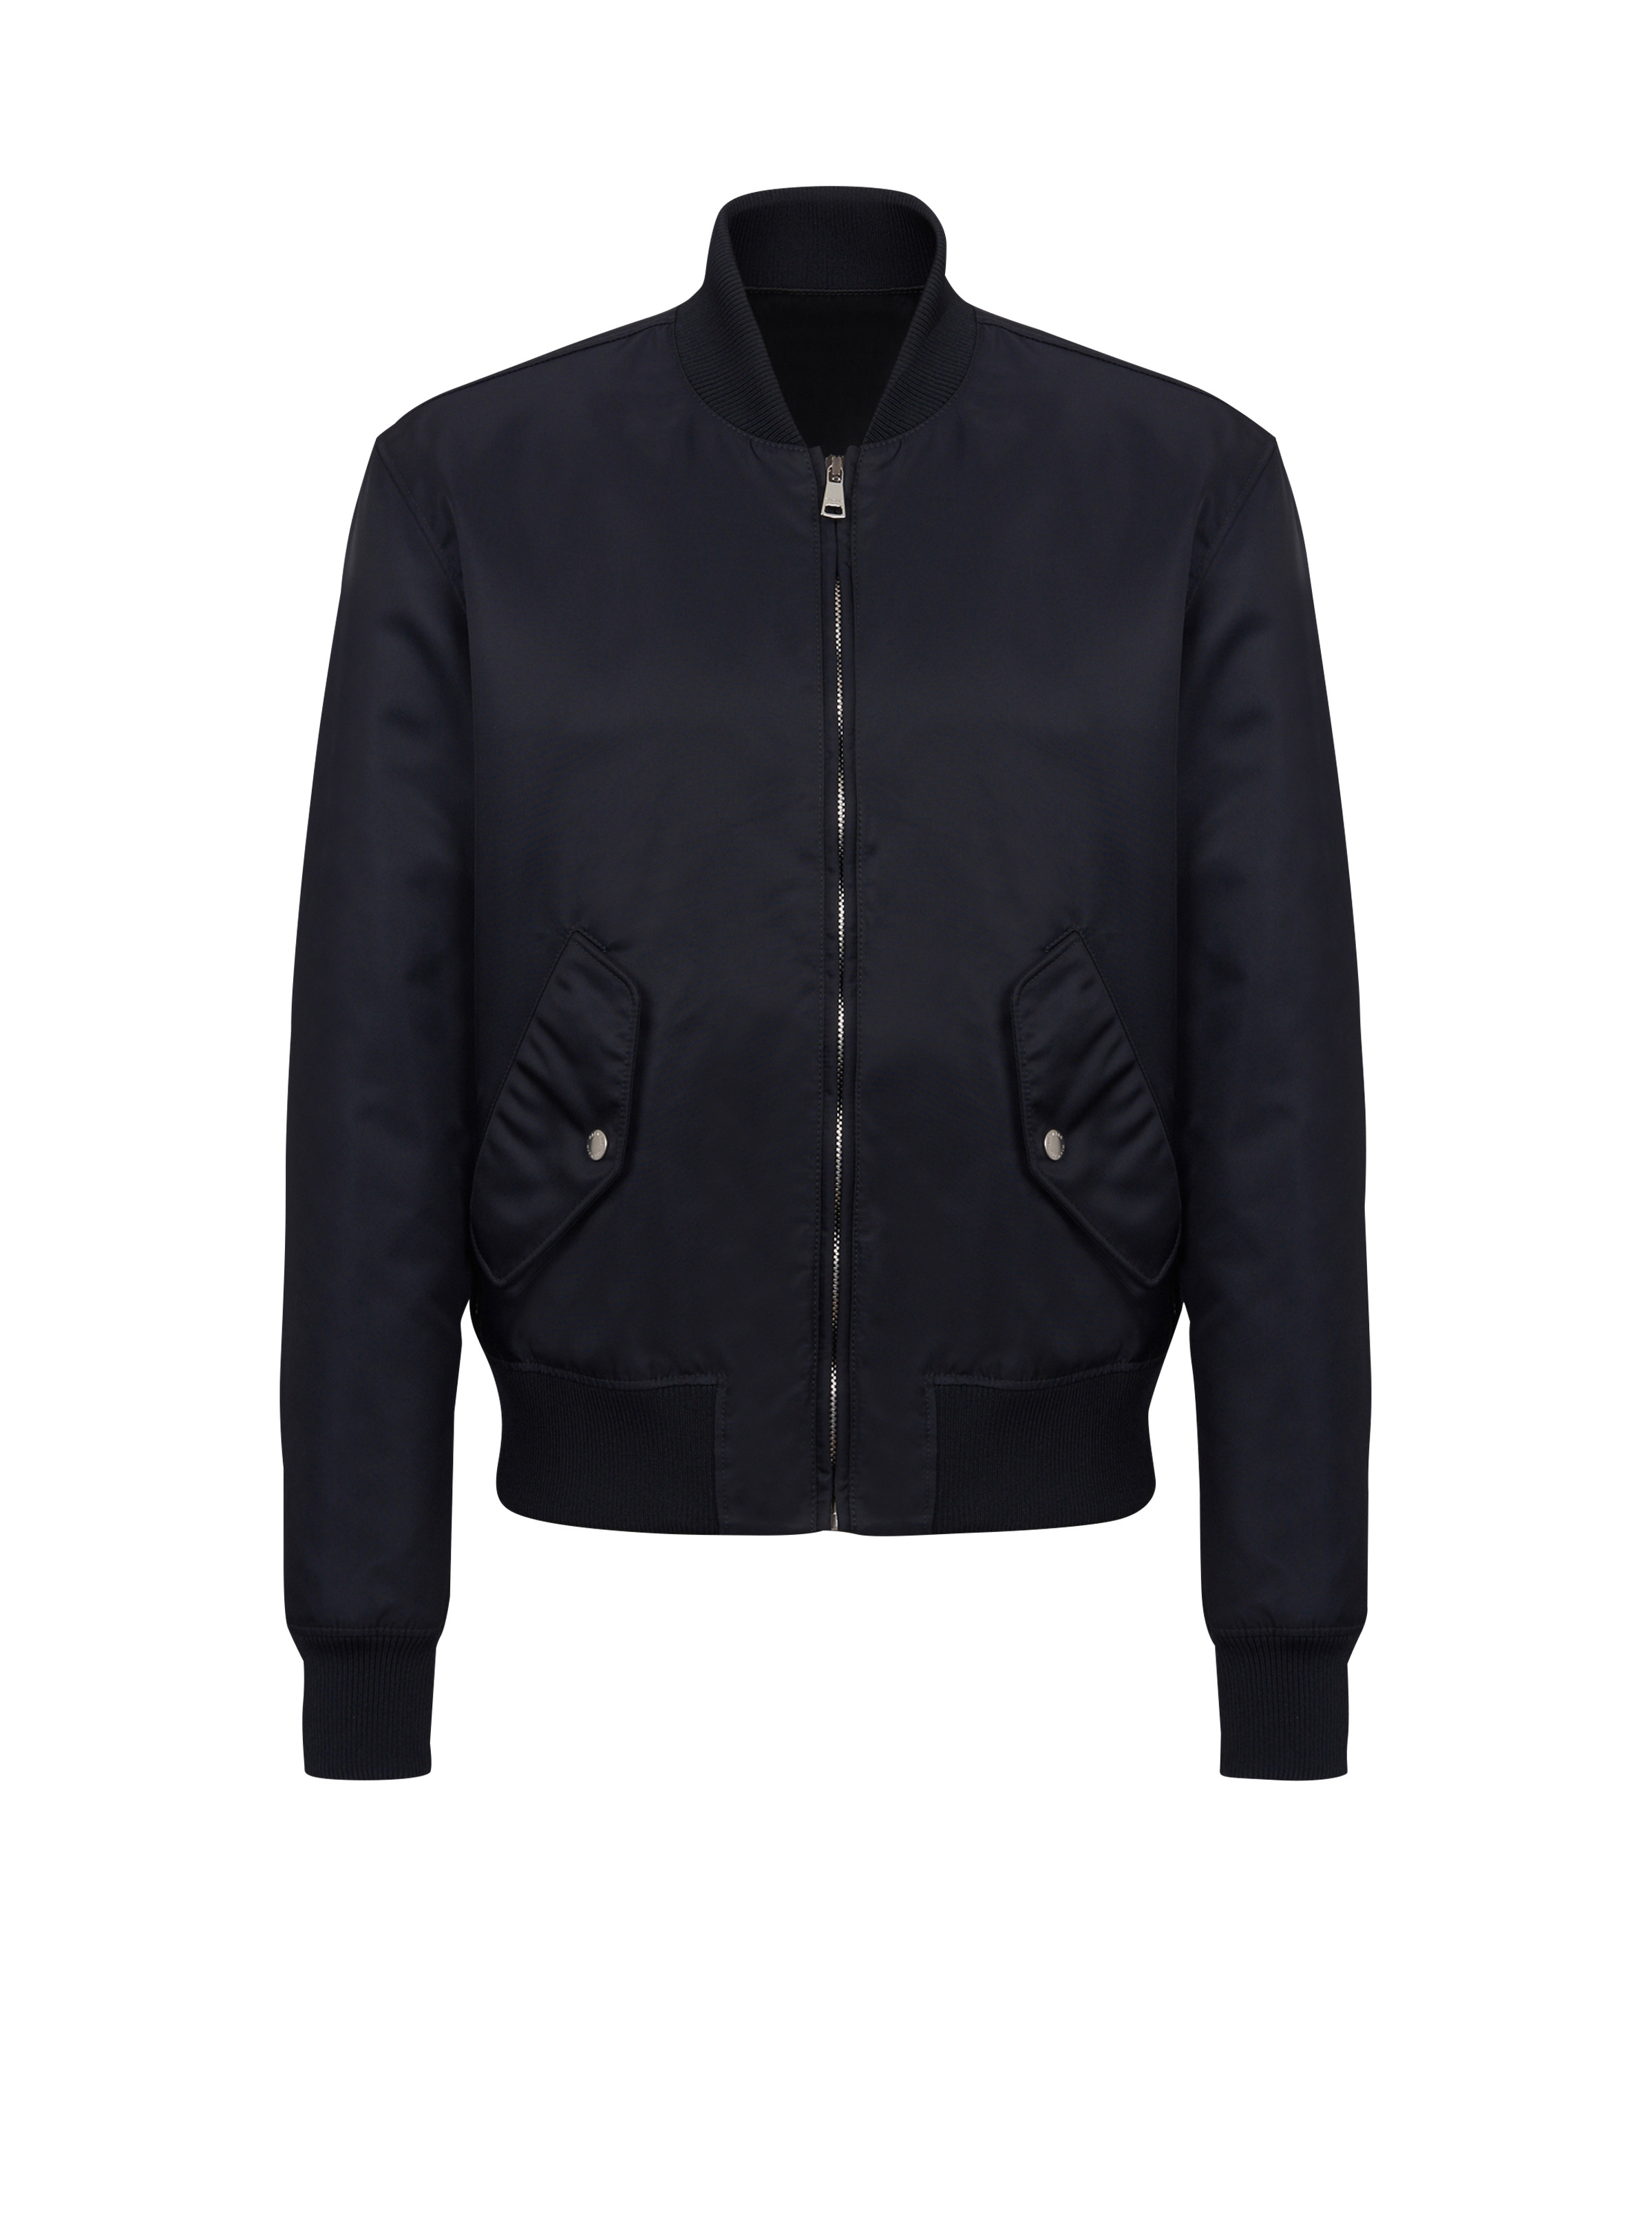 Bomber jacket with Balmain Signature embroidery on the back - 1